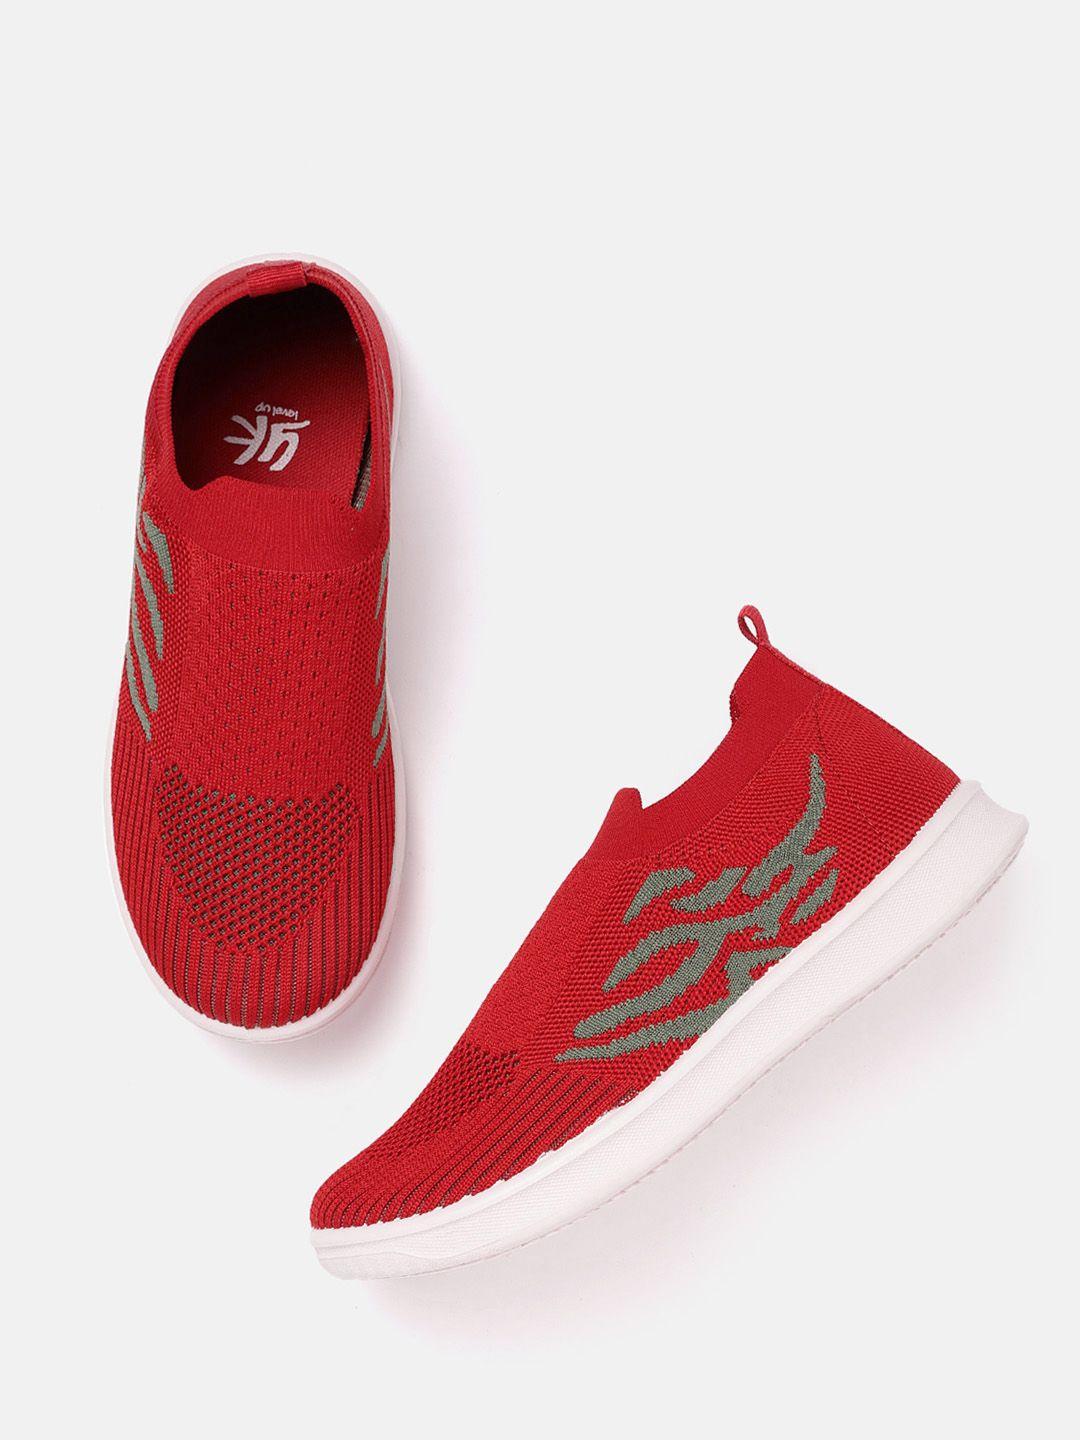 yk boys red & grey woven design sneakers